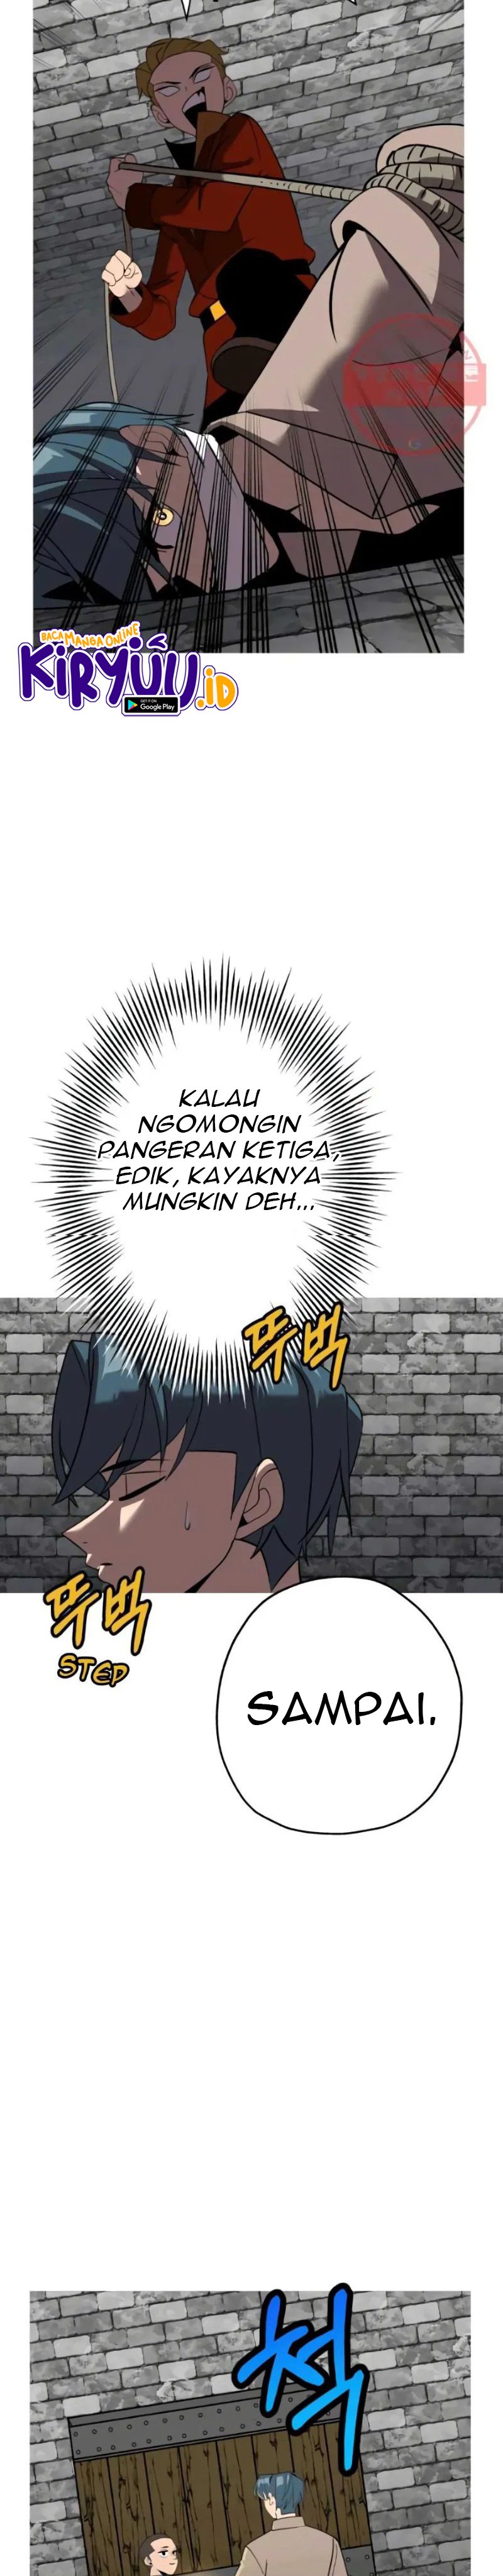 Dilarang COPAS - situs resmi www.mangacanblog.com - Komik the story of a low rank soldier becoming a monarch 058 - chapter 58 59 Indonesia the story of a low rank soldier becoming a monarch 058 - chapter 58 Terbaru 11|Baca Manga Komik Indonesia|Mangacan